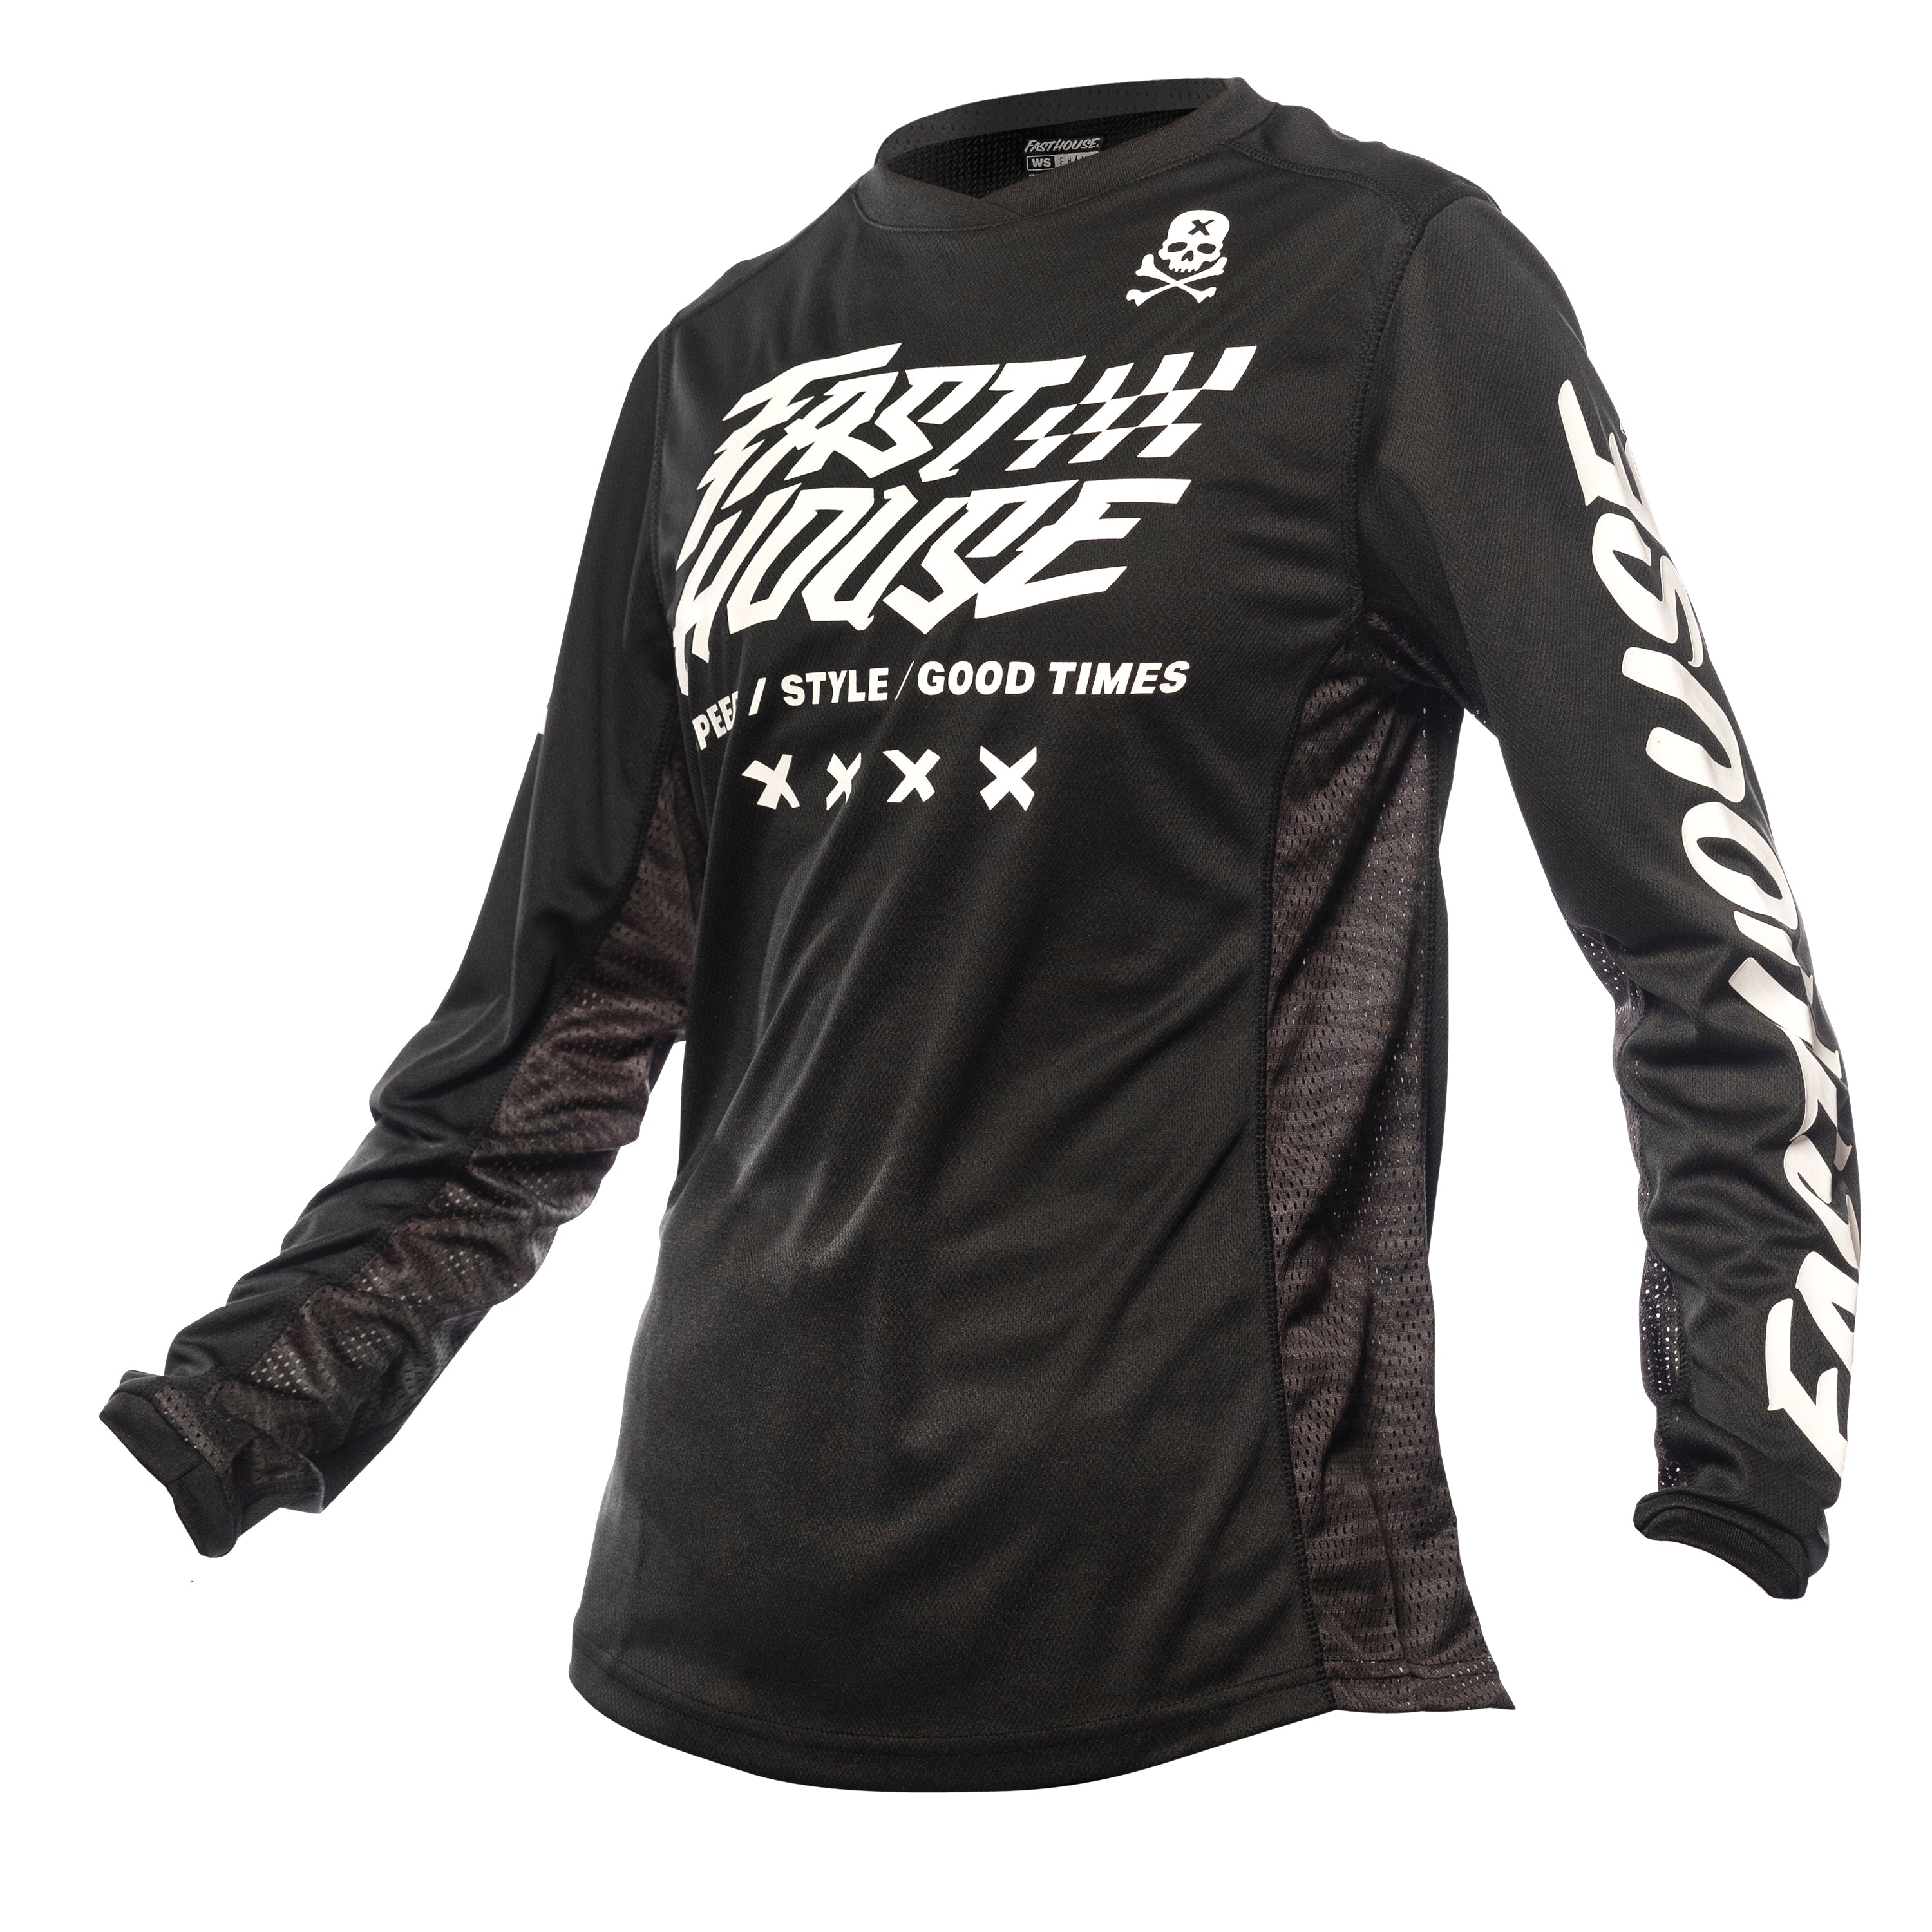 Grindhouse Rufio Women's Jersey - Black